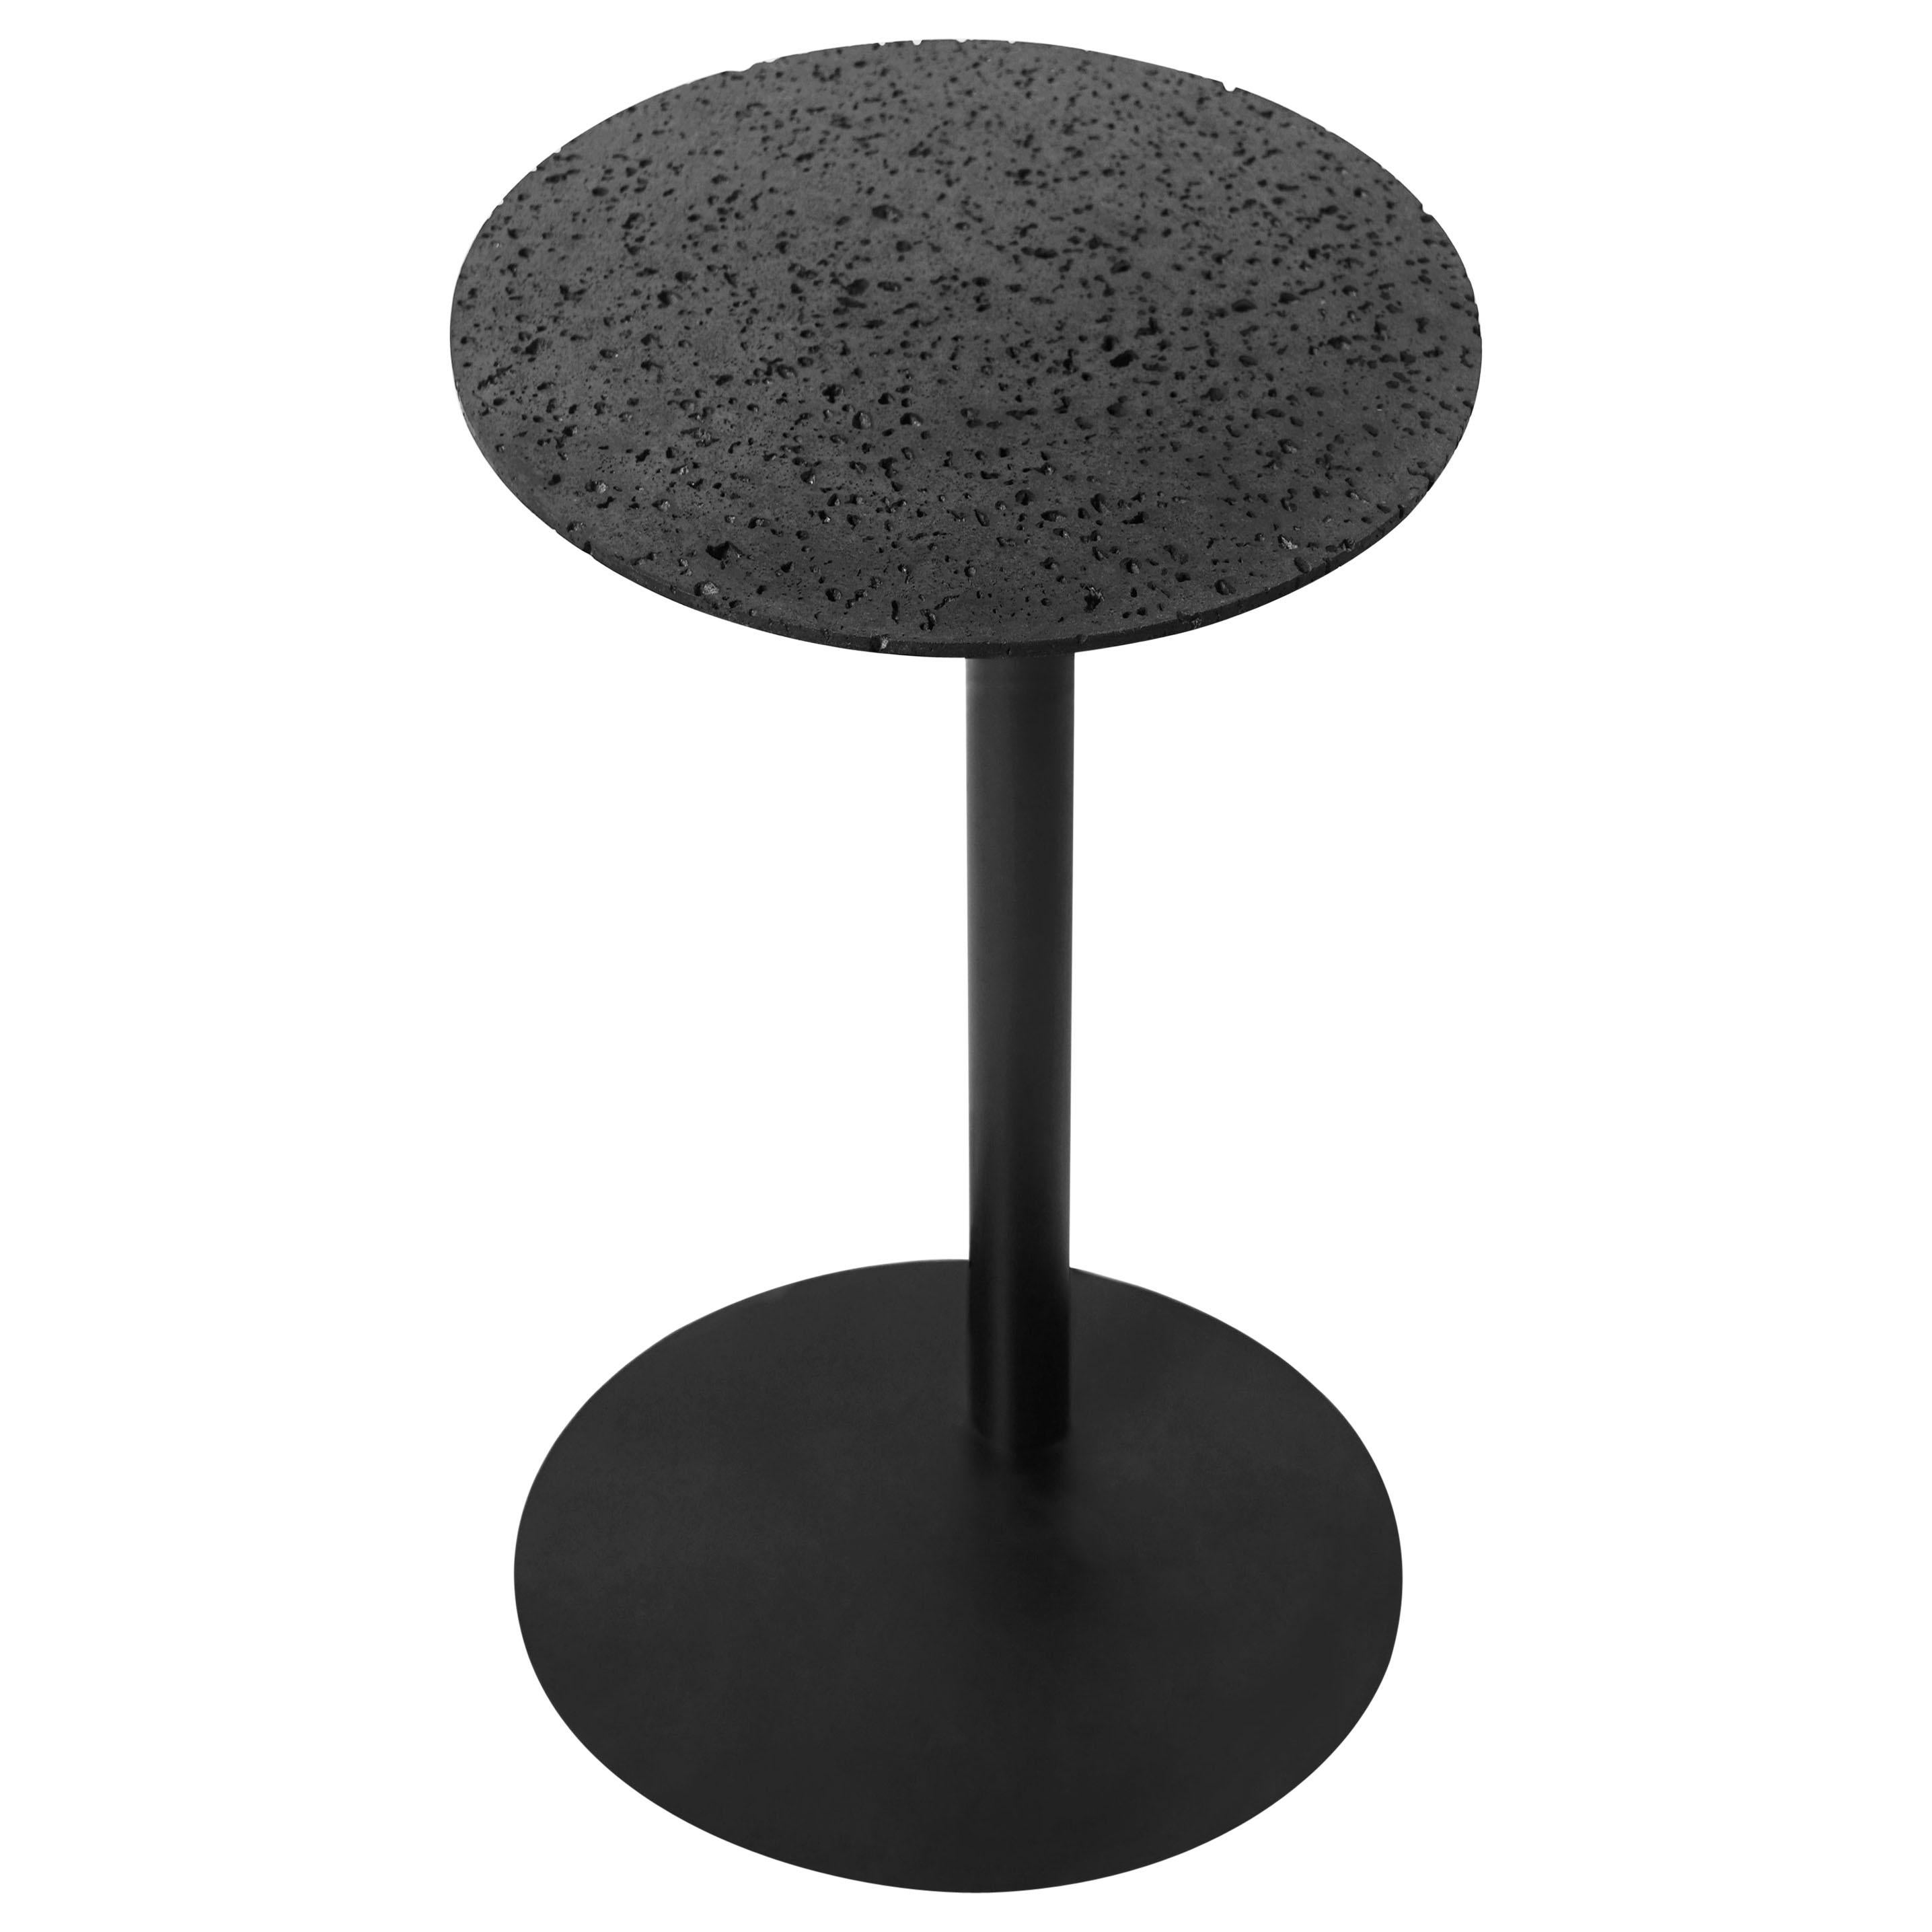 Lava Stone and Powder-Coated Steel Side Table, “Right, ” by Buzao